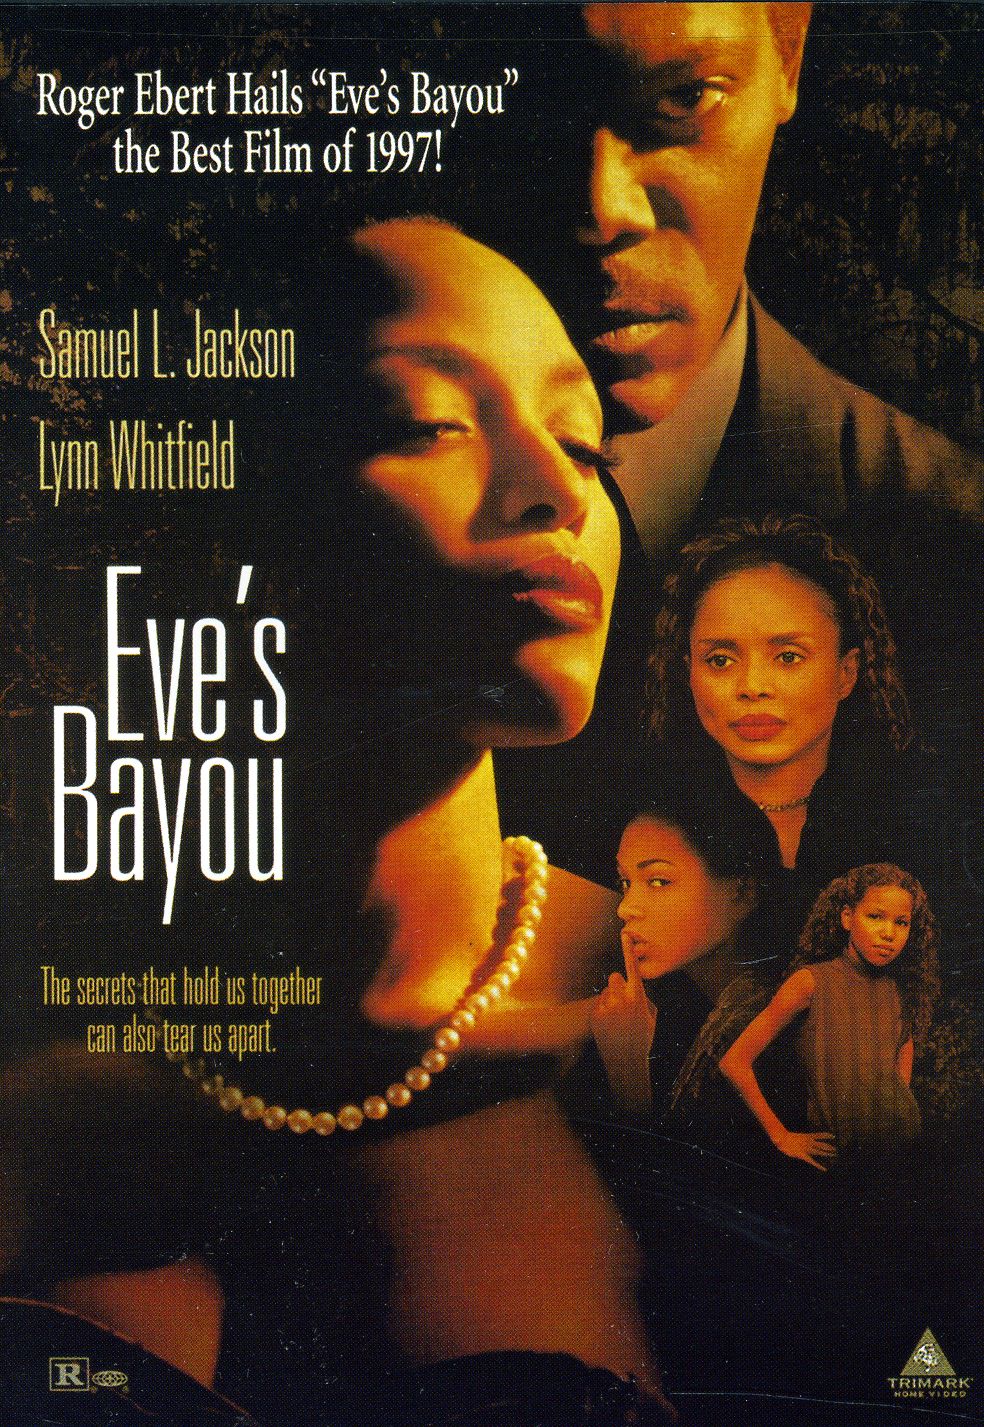 Women of Color in Film and TV: ‘Eve’s Bayou’ belongs in the canon